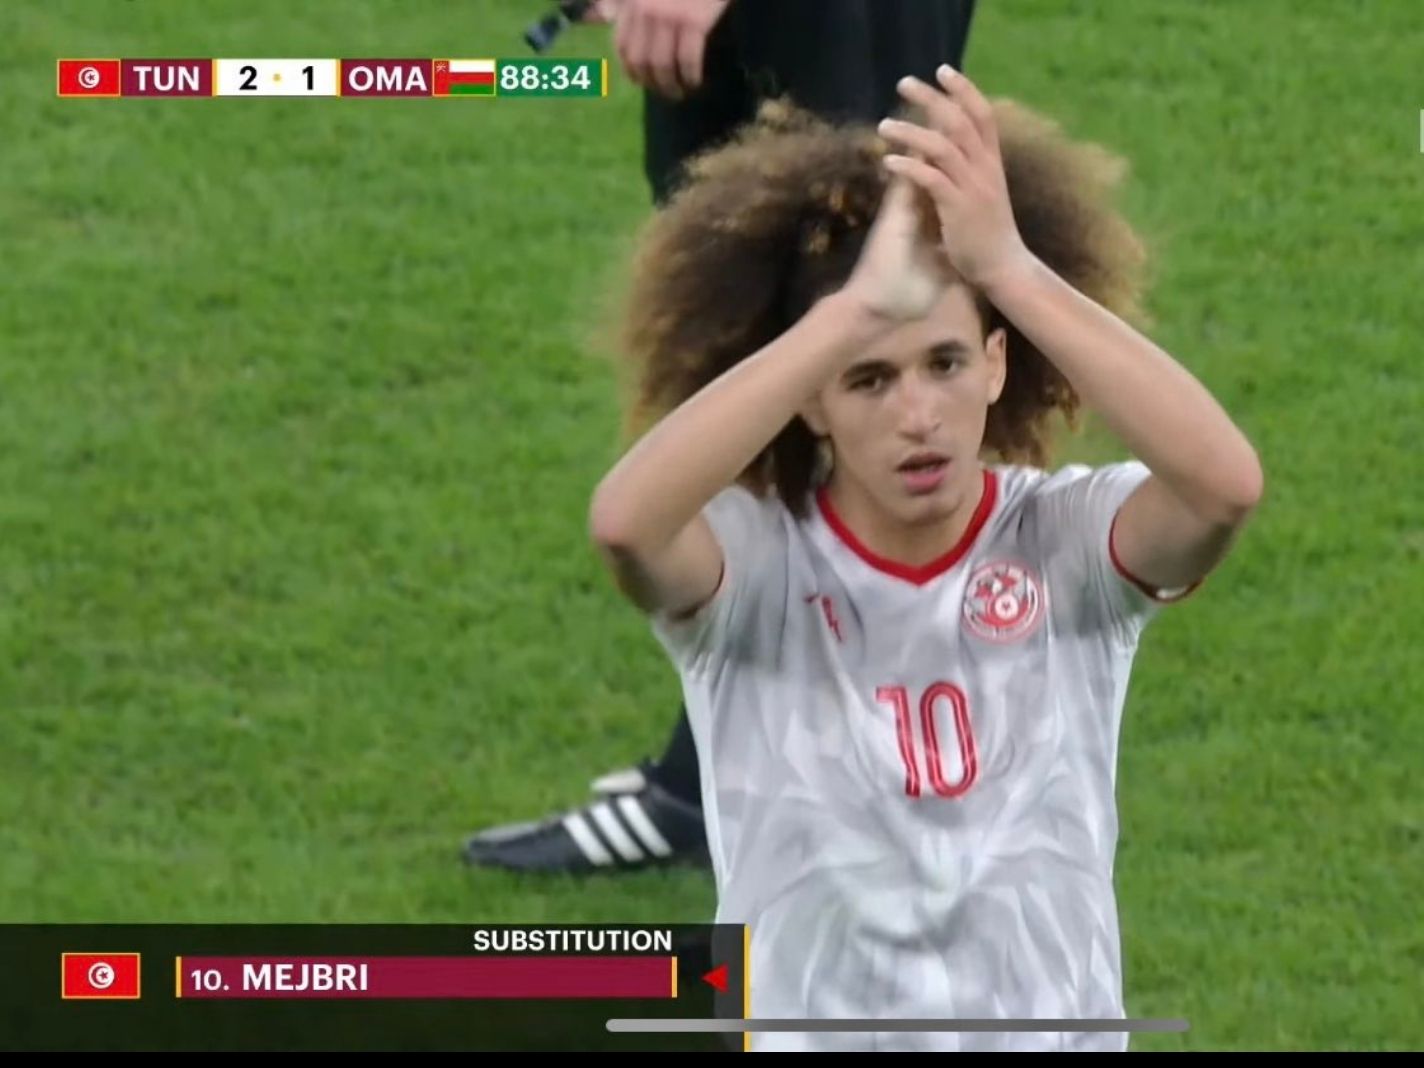 Hannibal Mejbri was caught time-wasting during the game against Oman